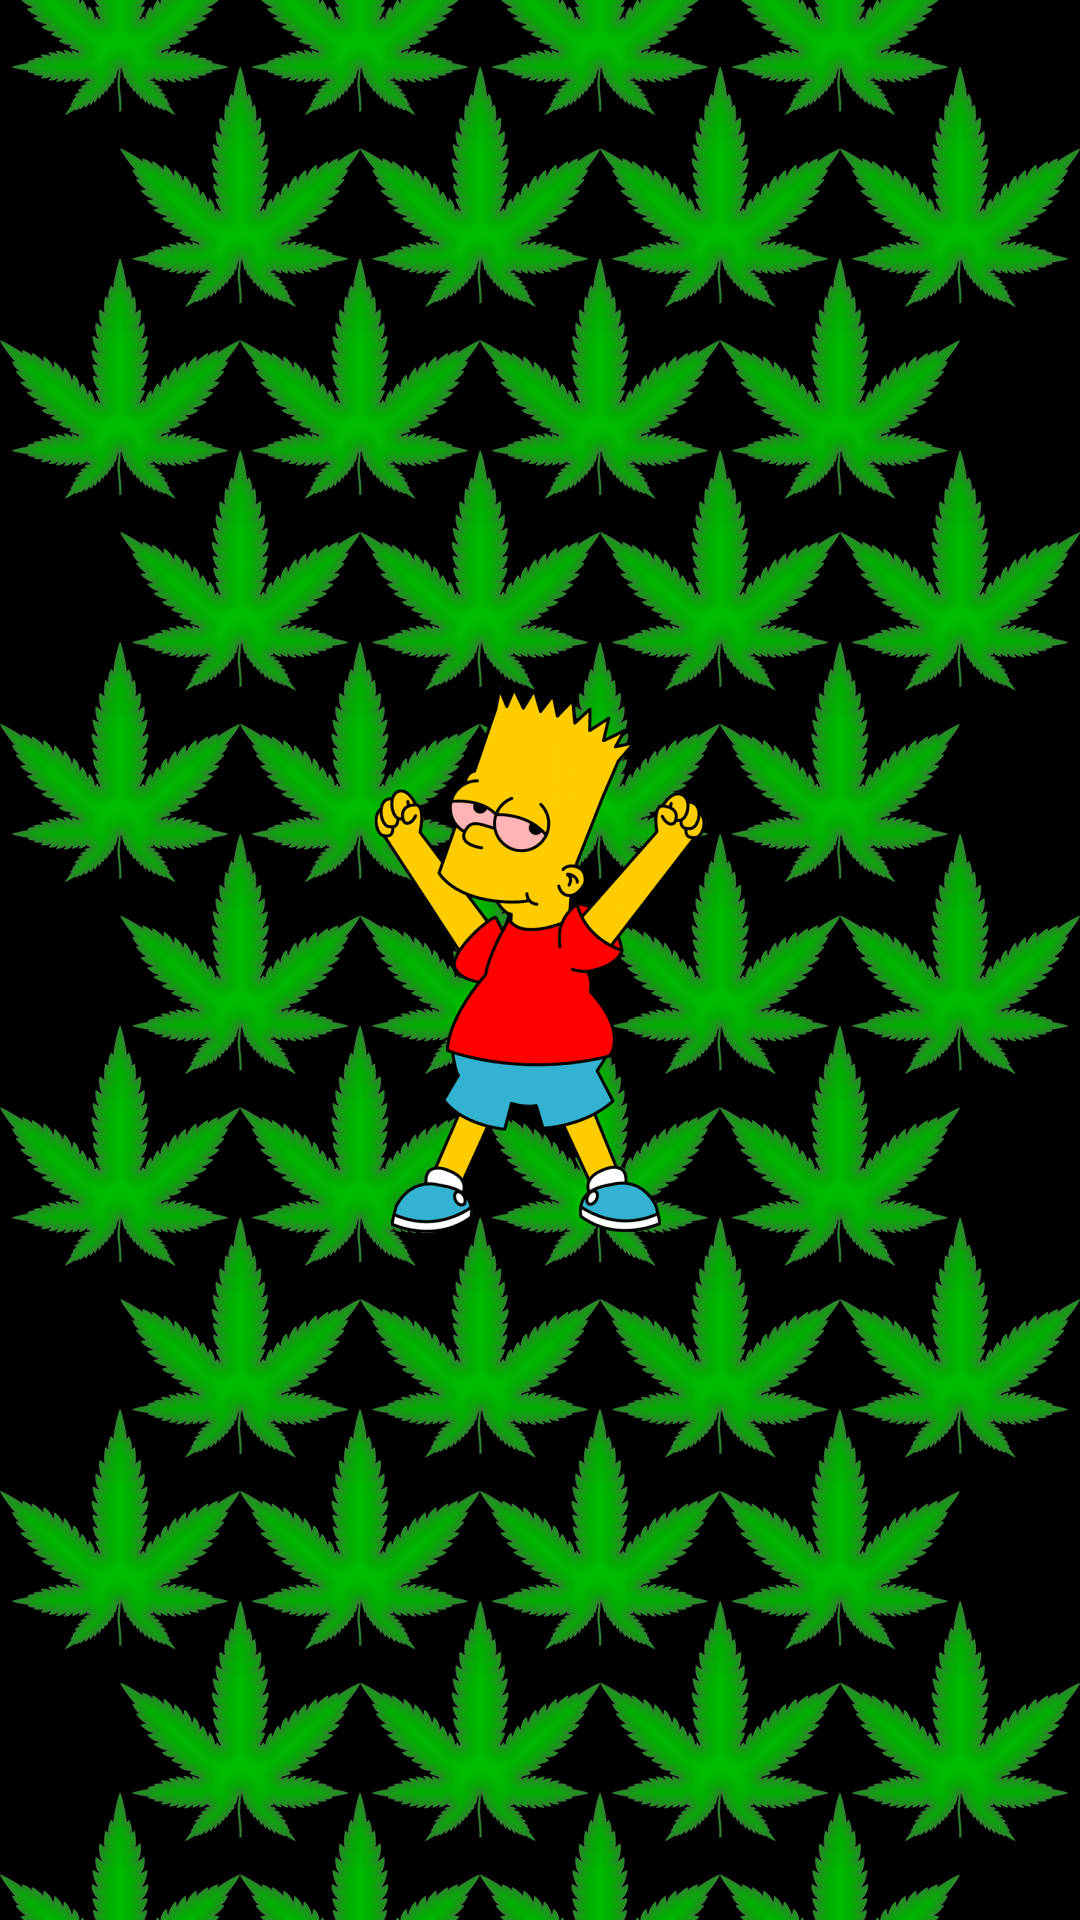 Weed And Bart Simpson For Iphone Wallpaper